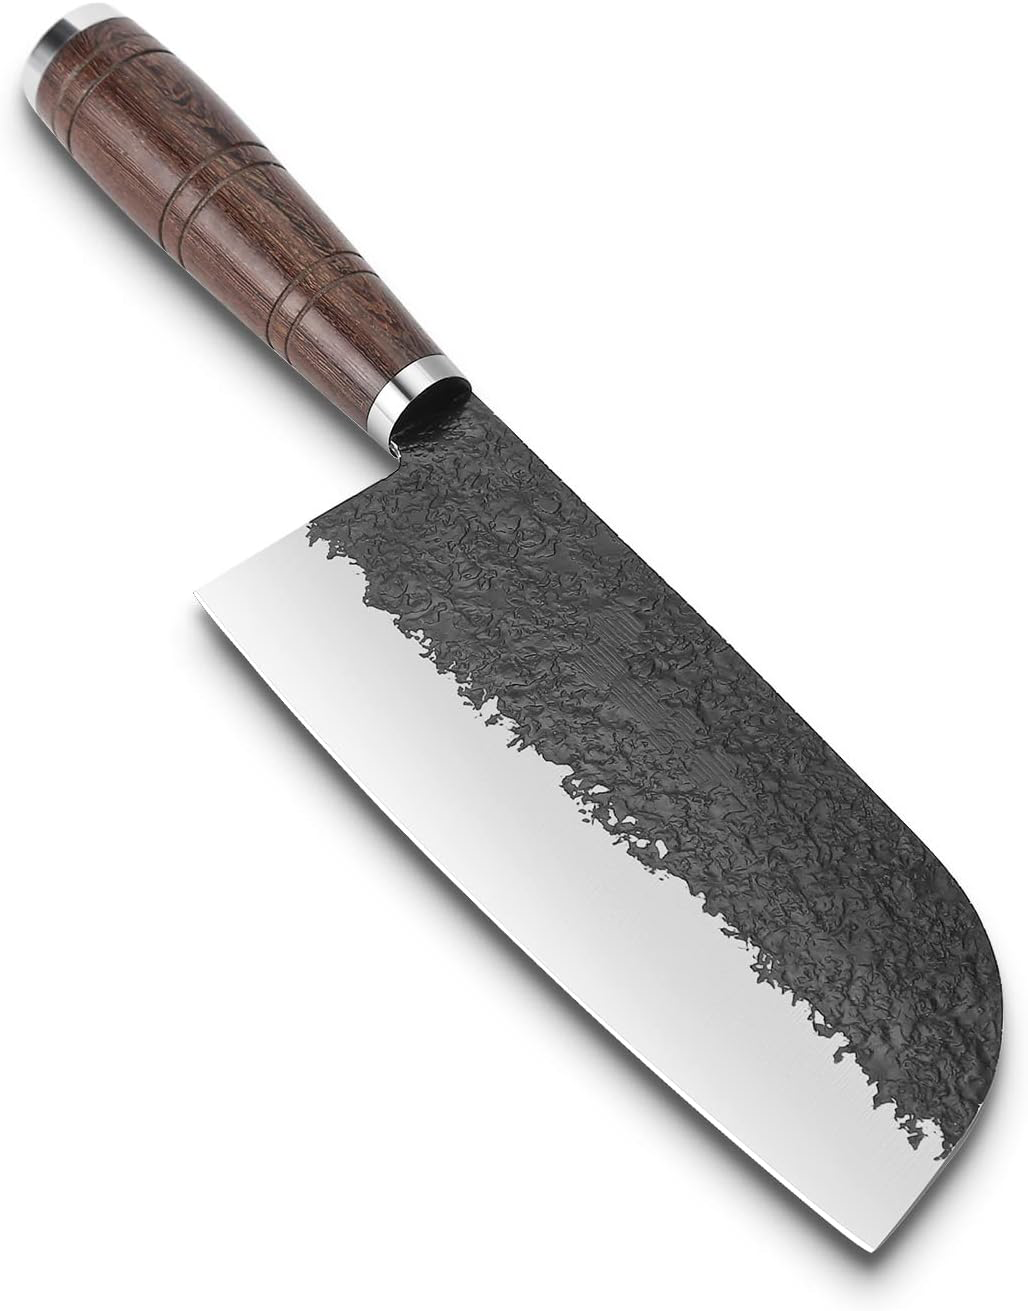 KD Hand-Forged Cleaver: The Perfect Kitchen Companion – Knife